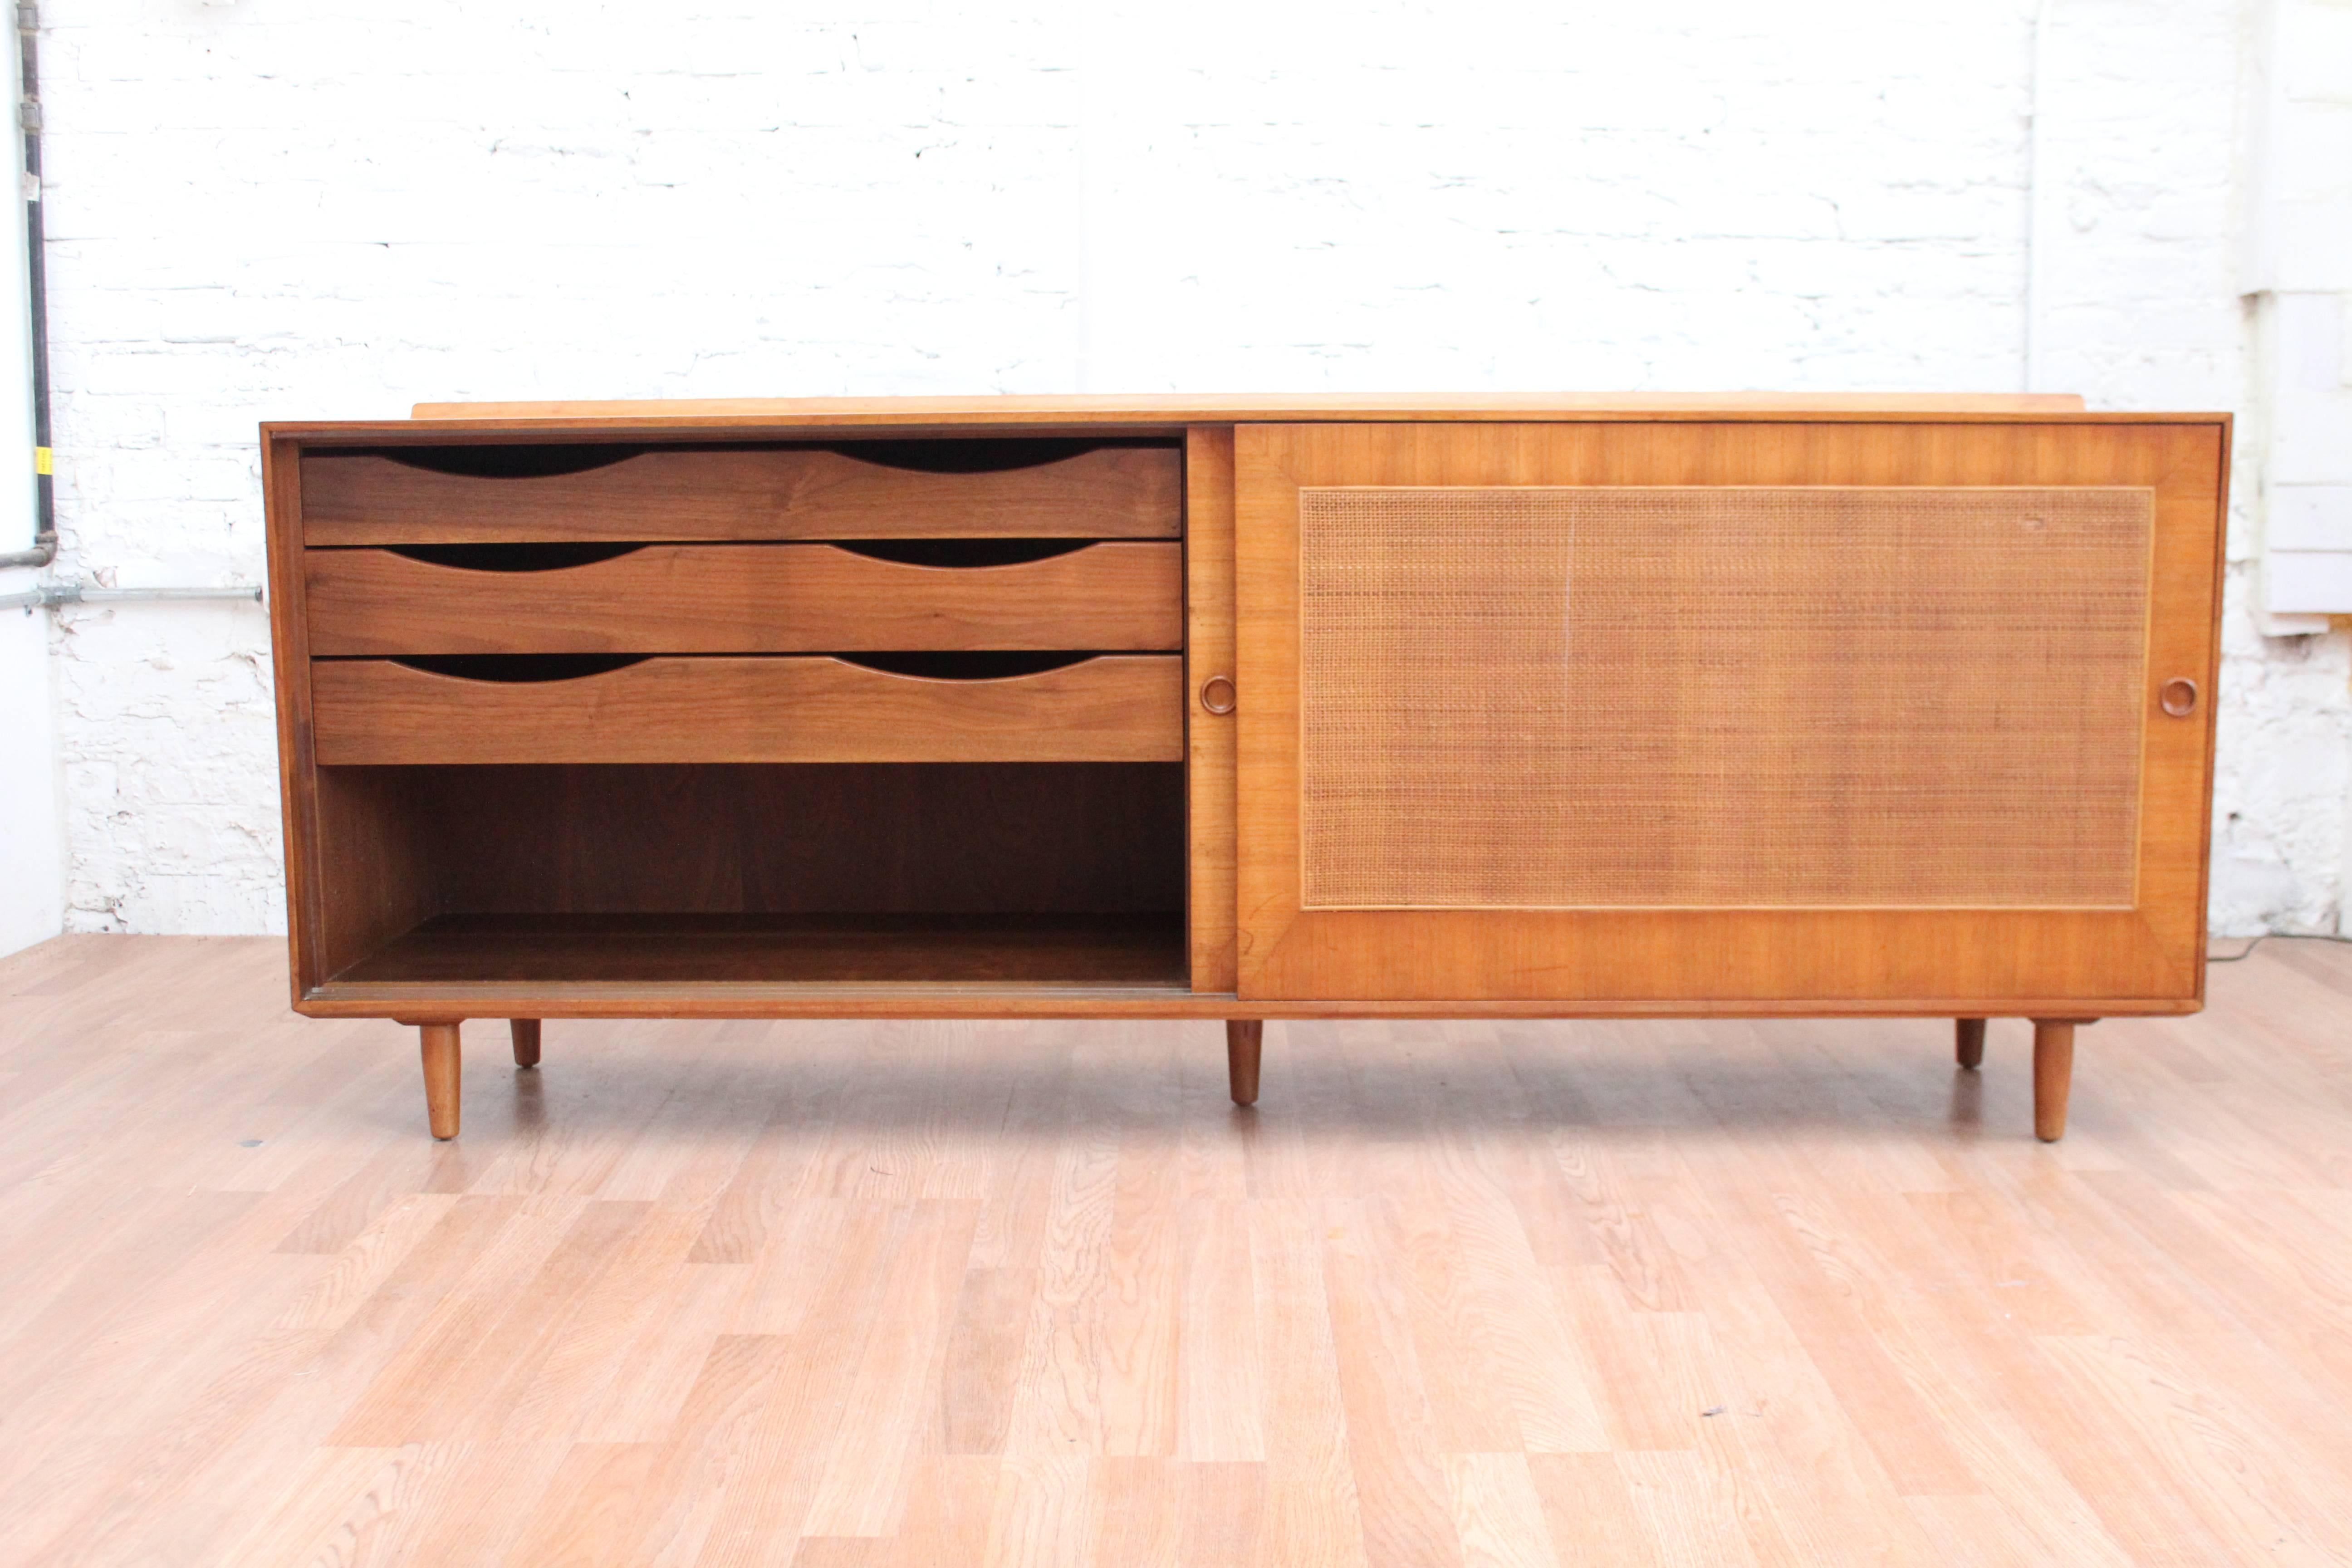 Attention all Purist! Imagine adding this original finish, Finn Juhl for Baker, period credenza to your collection! This magnificence features two sliding doors that conceal an adjustable shelf and three pull-out drawers. The case sits on five